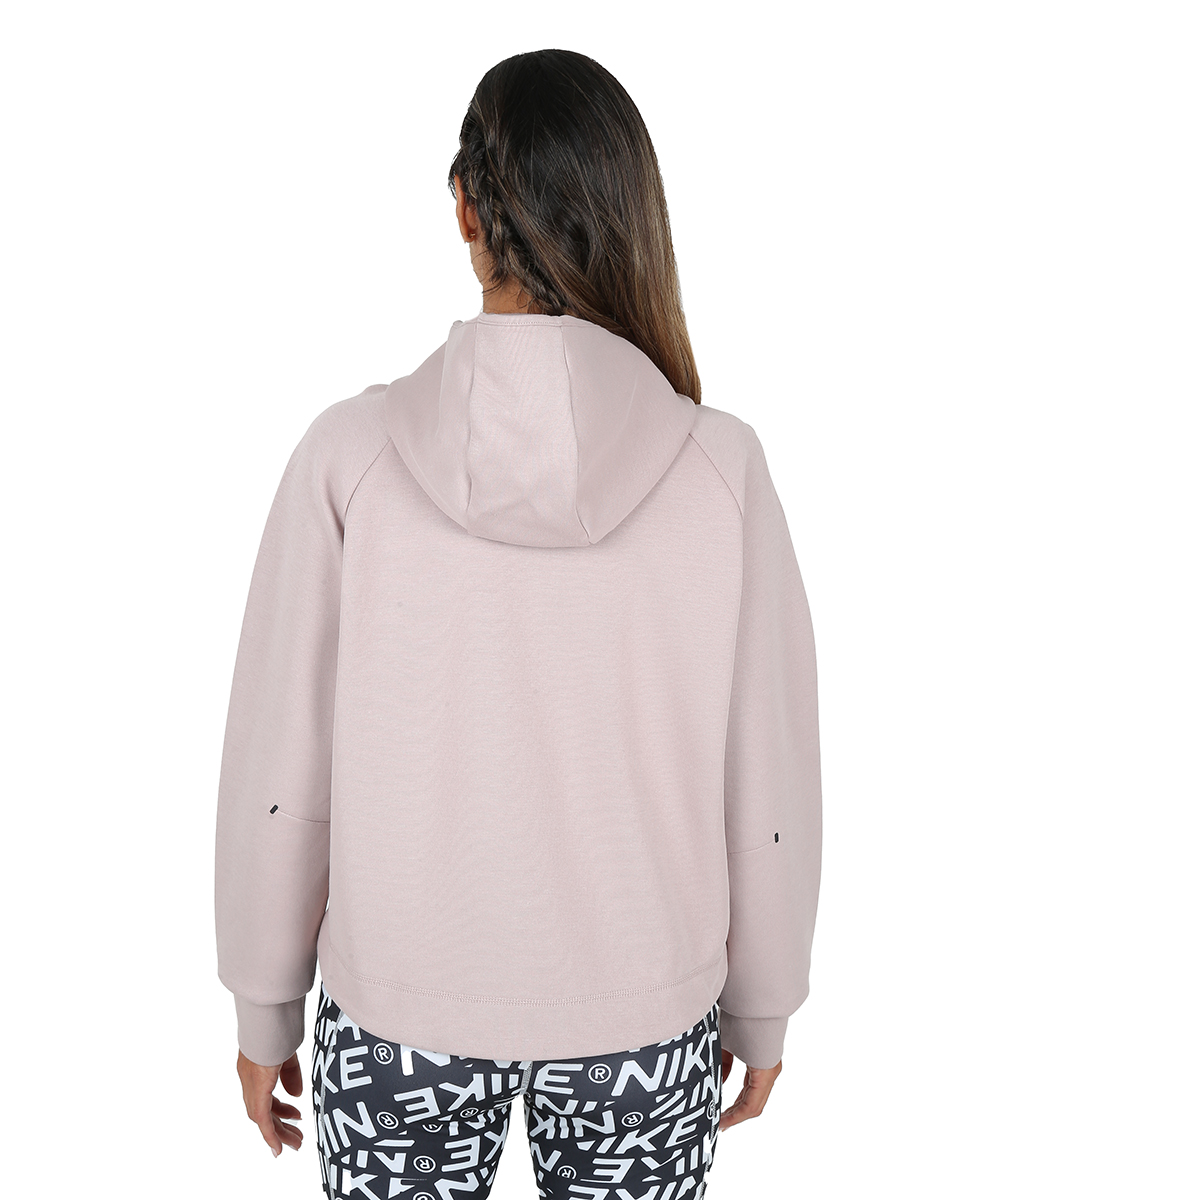 Campera Nike Sportswear Tech Windrunner Mujer,  image number null